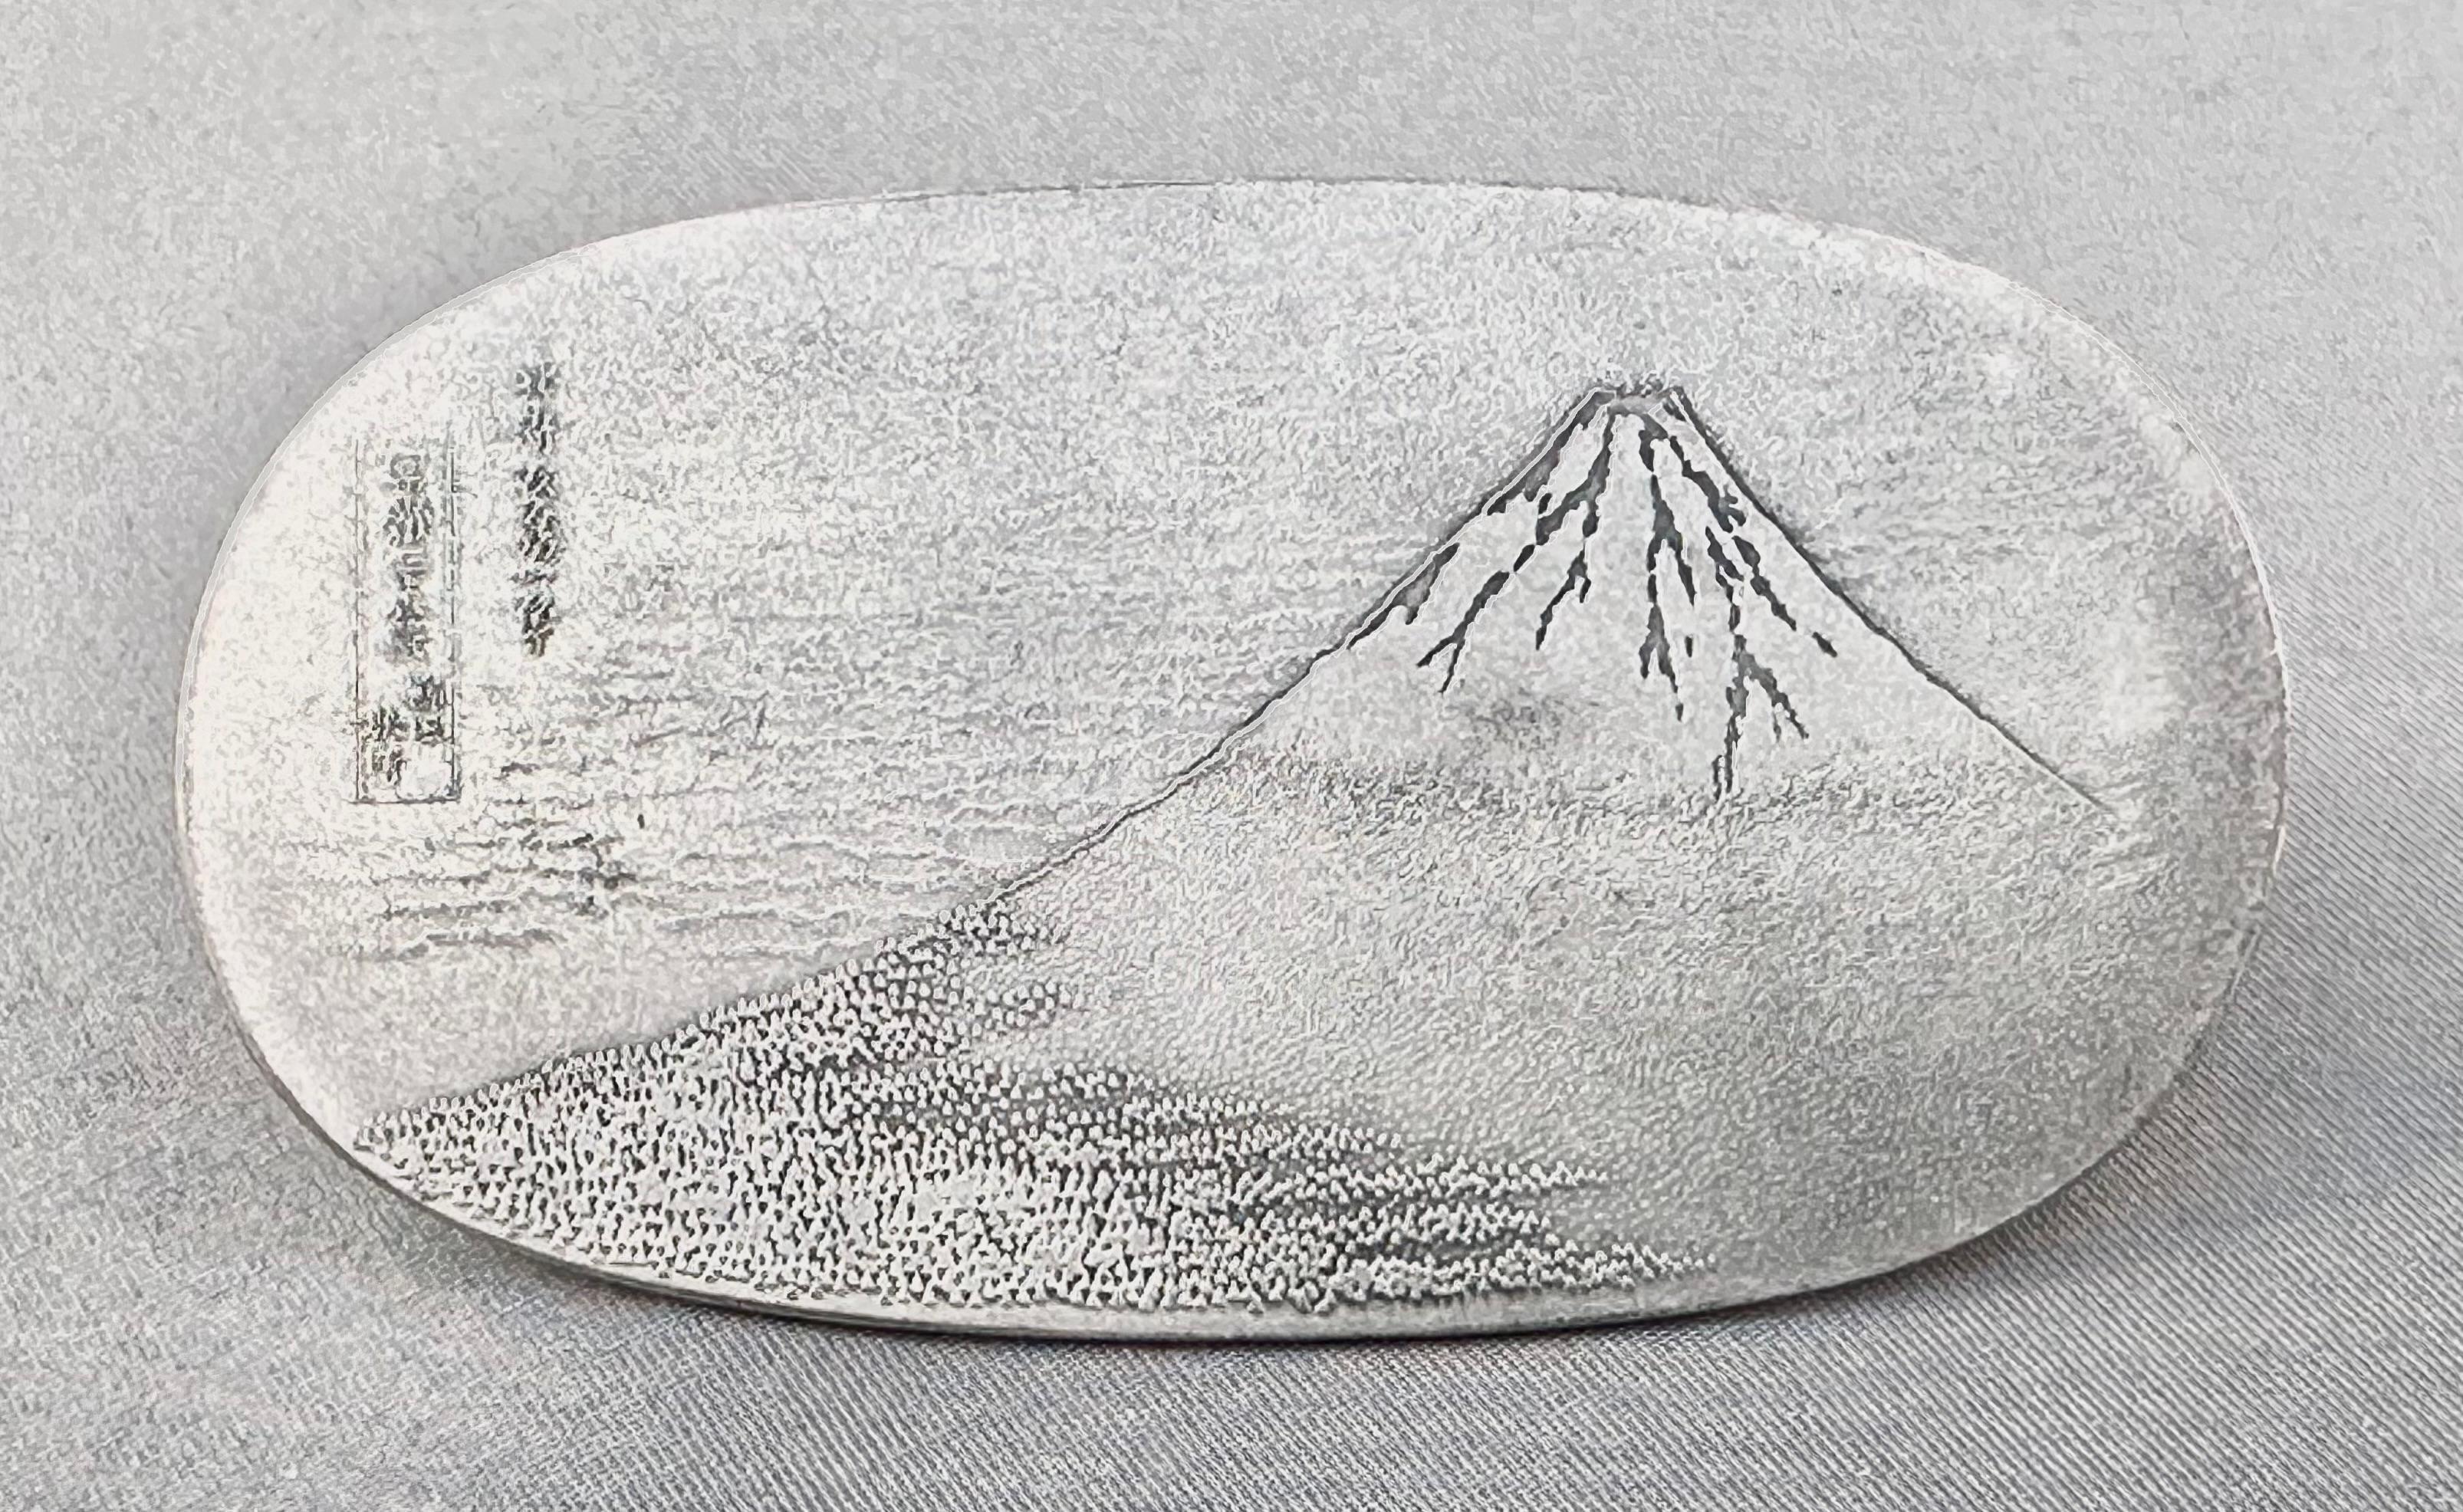  

Item Details :


Presenting a rare and beautiful Japanese collection of three pure silver koban featuring the most recognized scenes from 'Katsushika Hokusai’s' iconic woodblock print series ‘Thirty-Six Views of Mt Fuji’  from the Edo